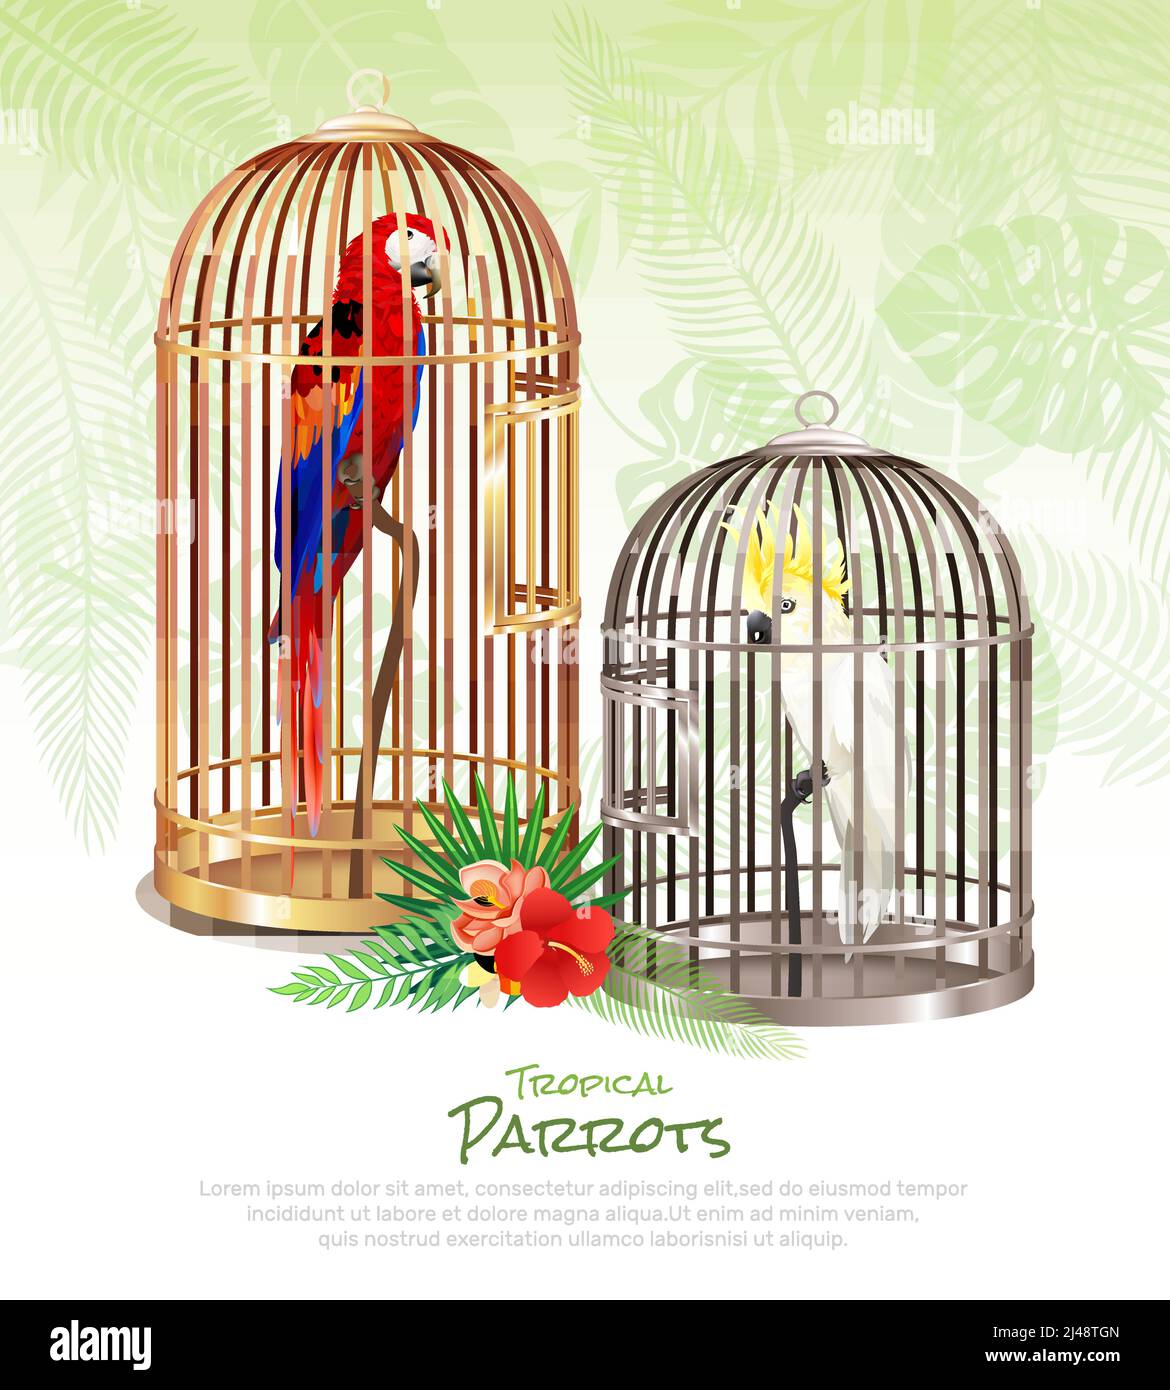 Bird market parrots poster with realistic images of rare birds in cumbersome cages with editable text vector illustration Stock Vector